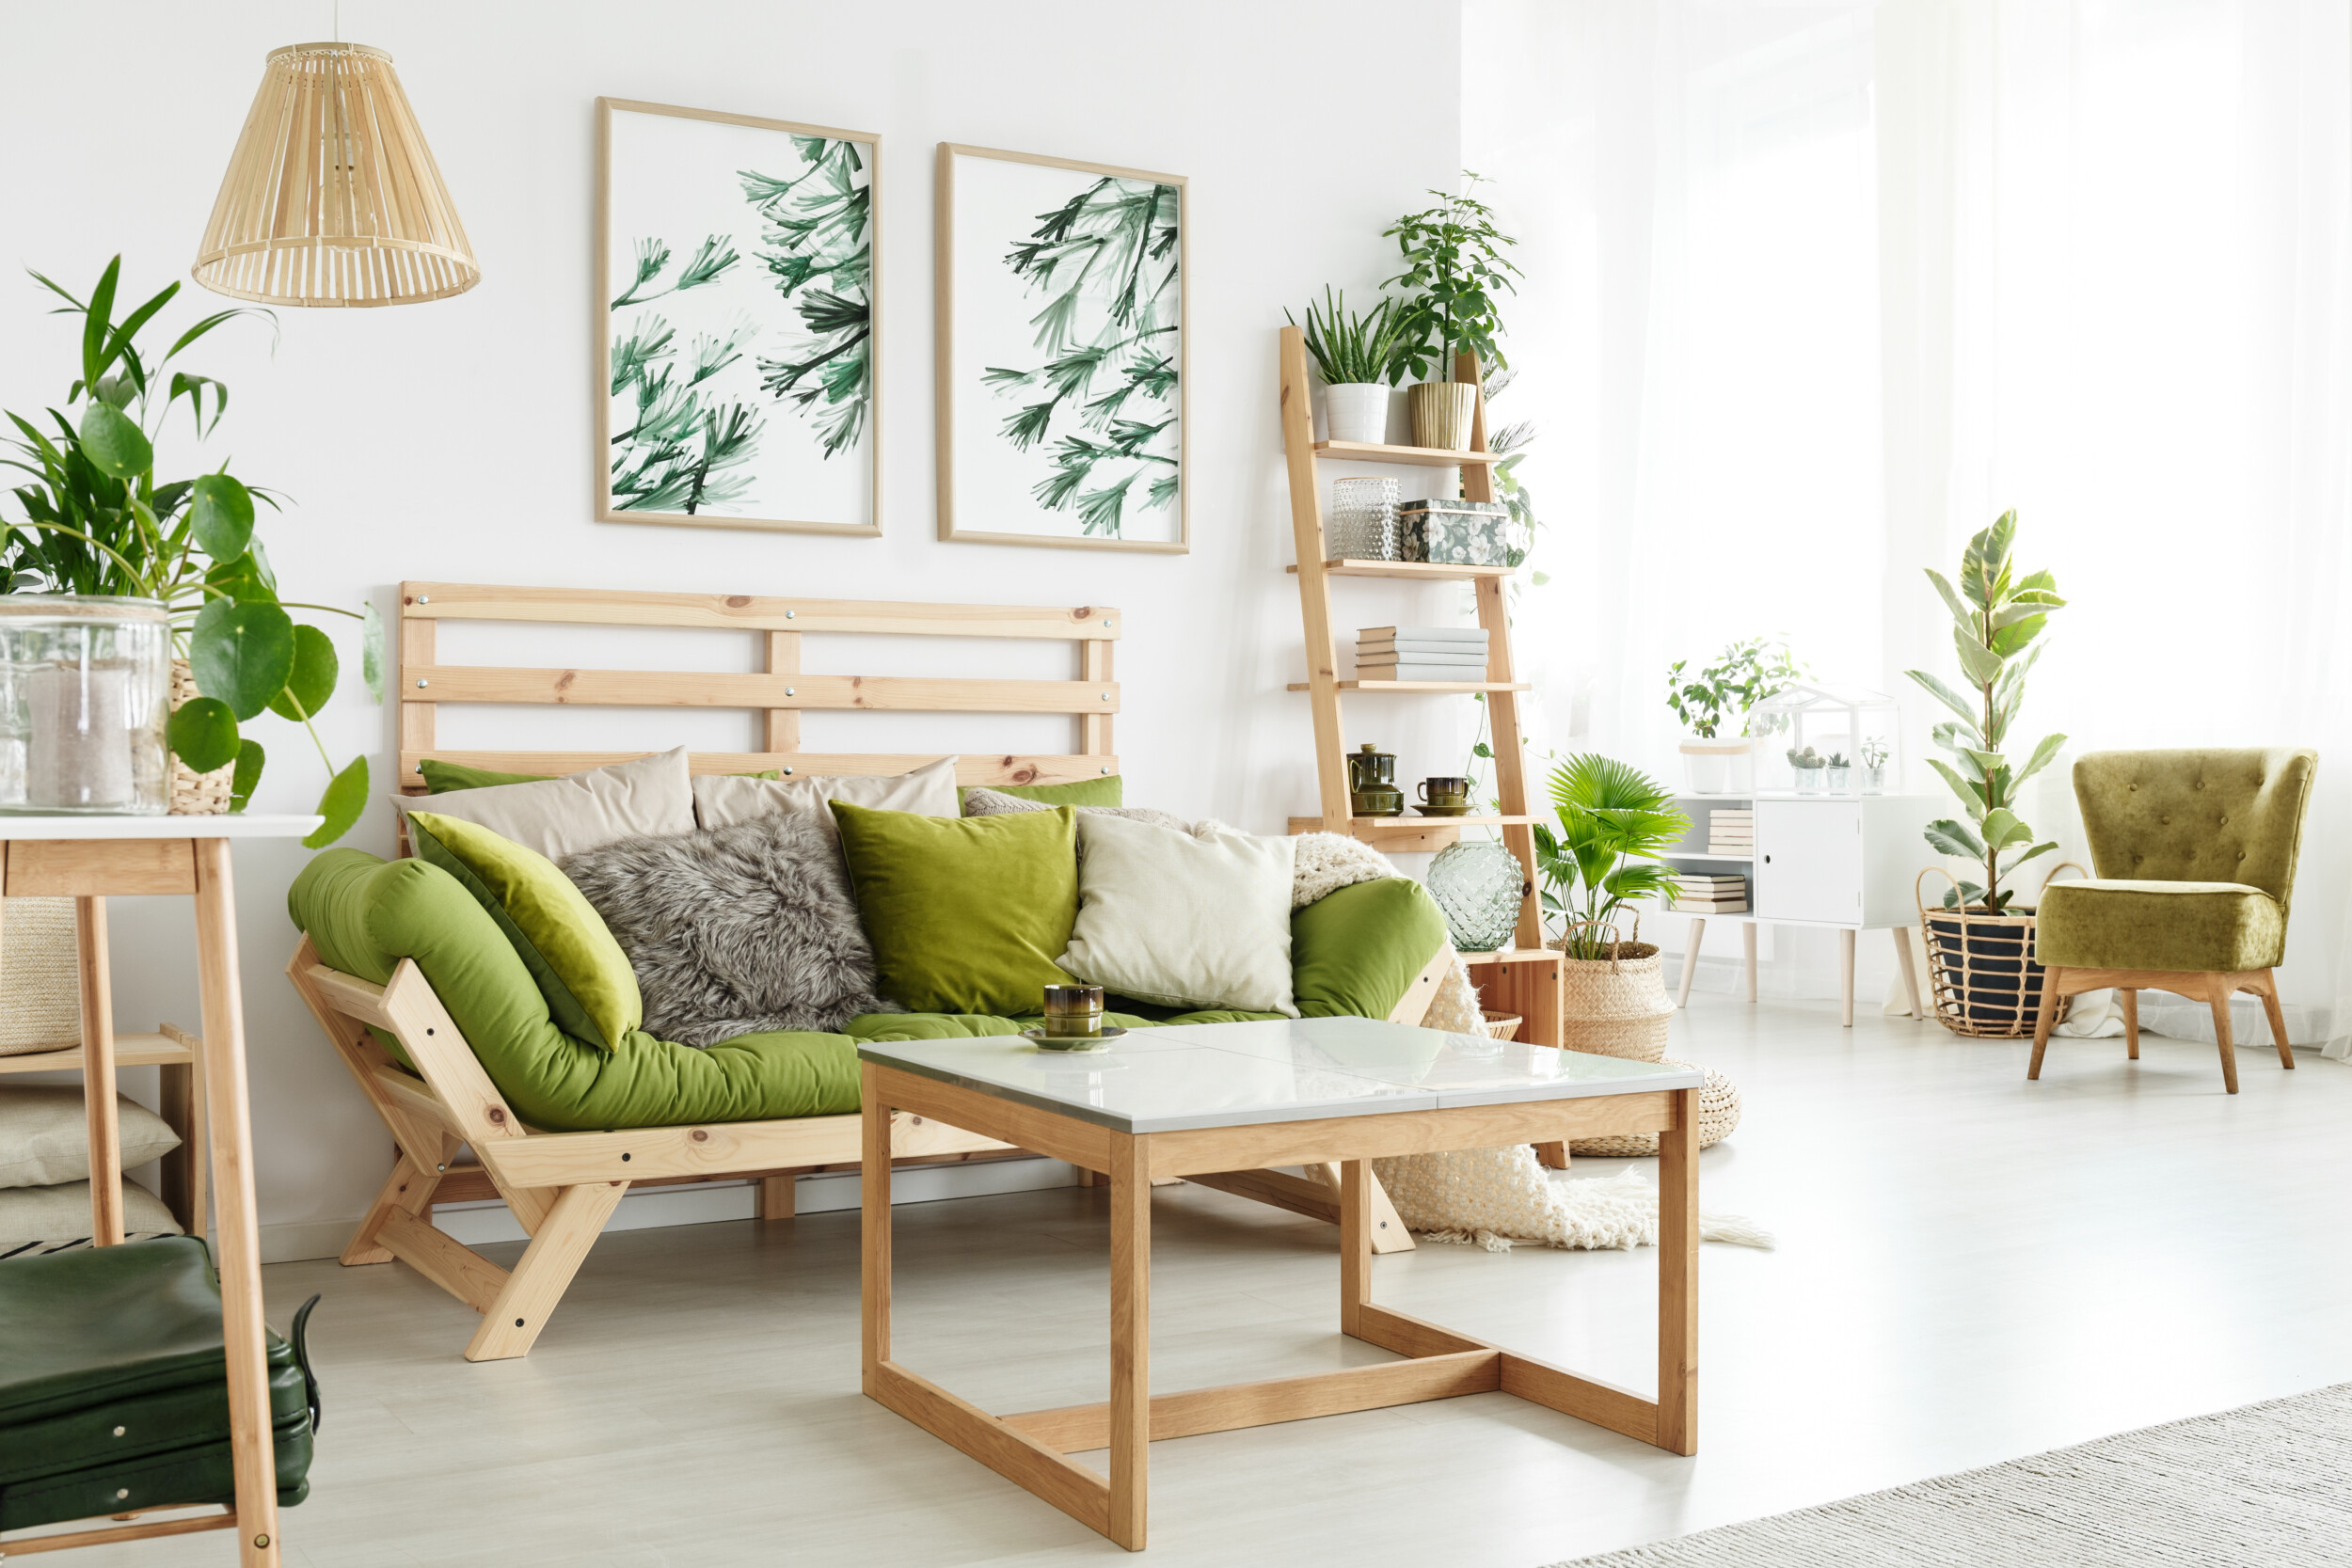 Eco living room with plants